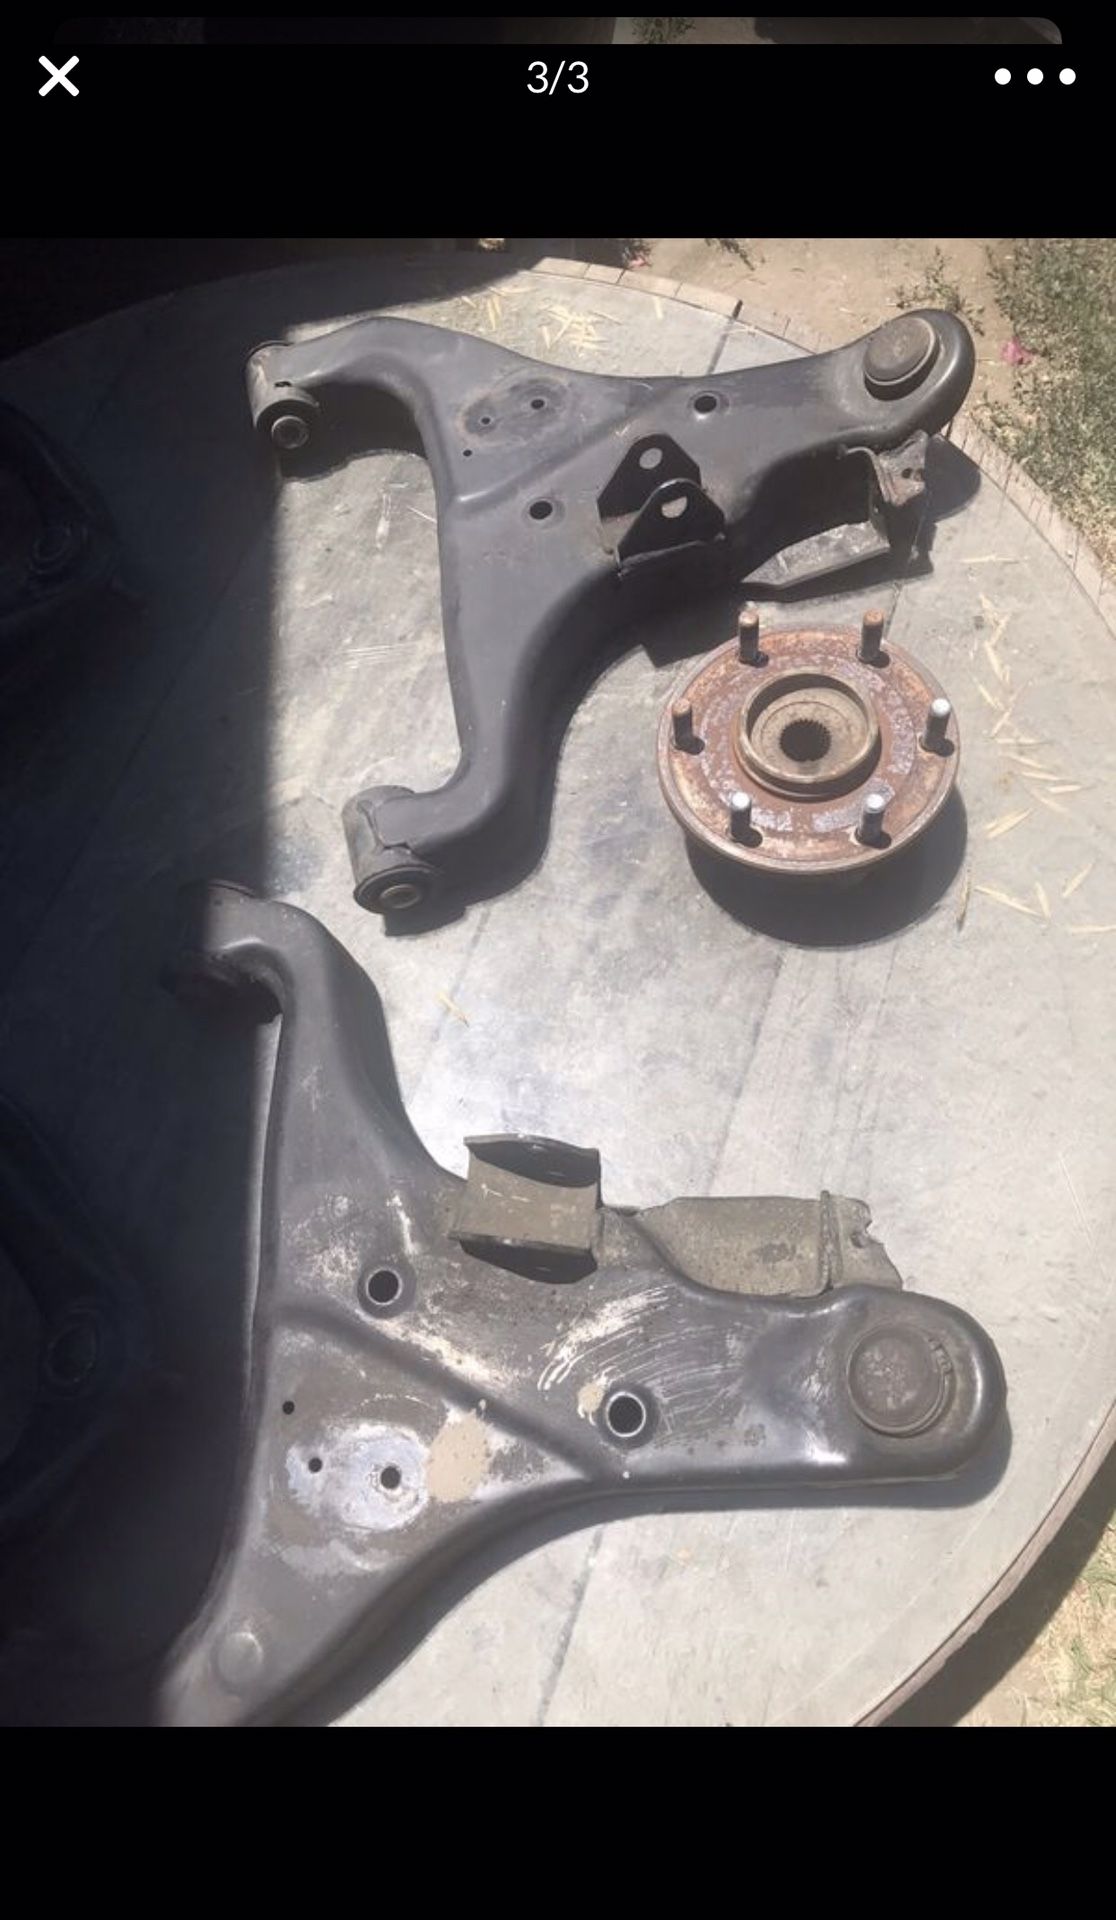 Nissan Titan 2004-2008 used parts feel free to offer